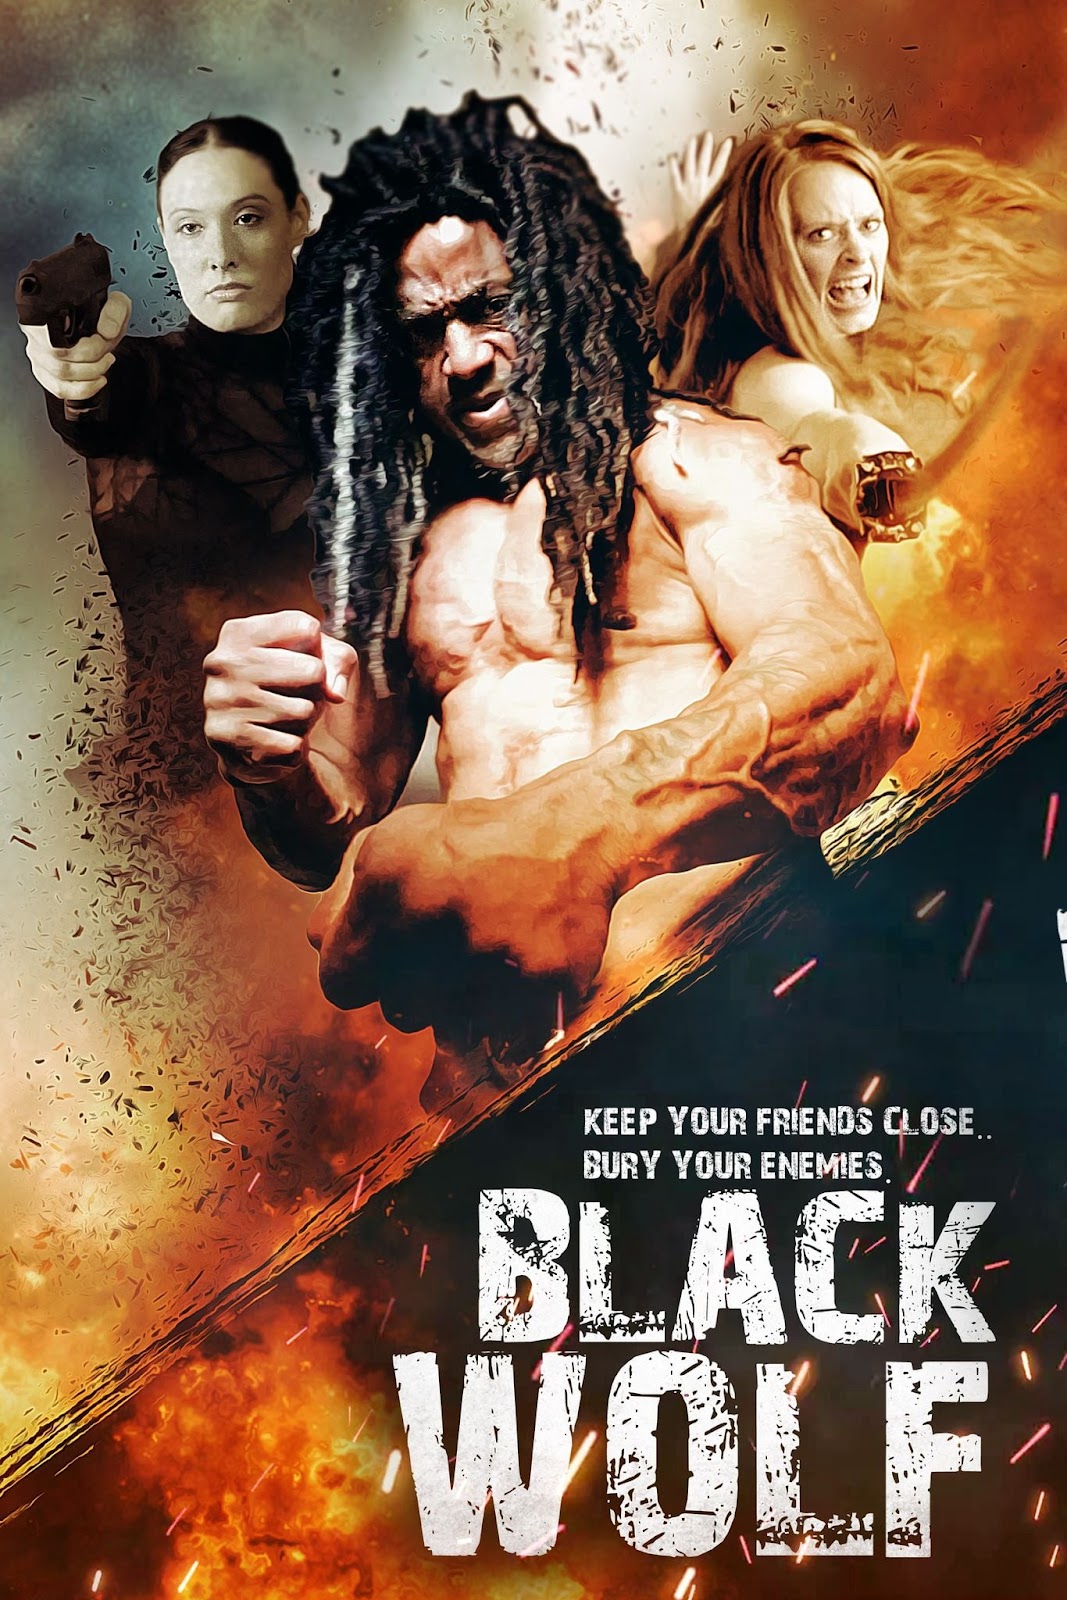 BLACK WOLF by William X Lee Movie Poster - KEEP YOUR FRIENDS CLOSE BURY YOUR ENEMIES